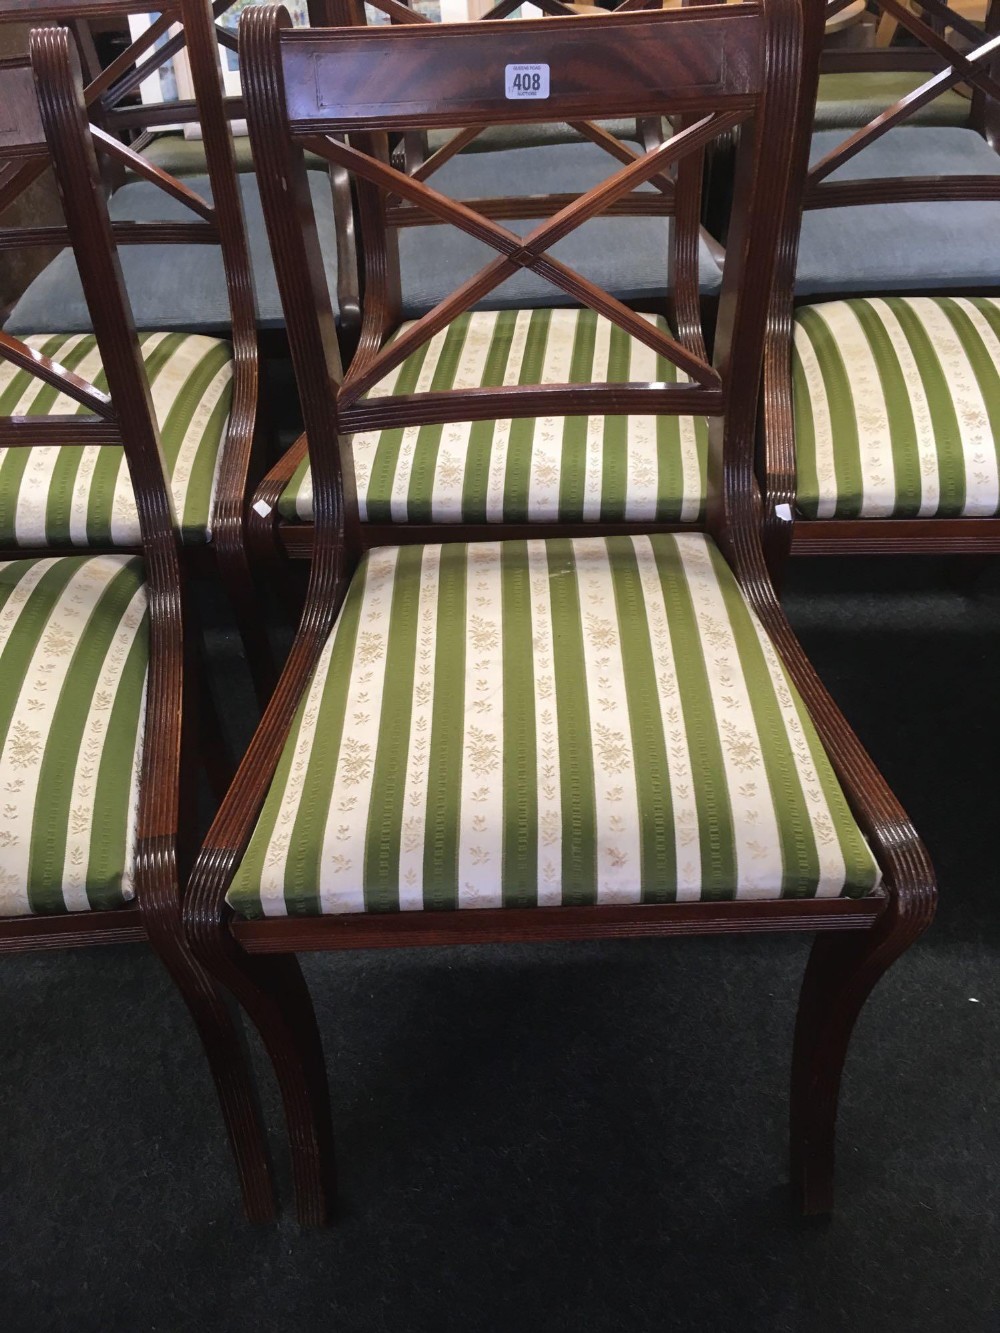 SET OF 6 MODERN MAHOGANY DINING CHAIRS WITH GREEN STRIPPED UPHOLSTERED SEATS - Image 2 of 3